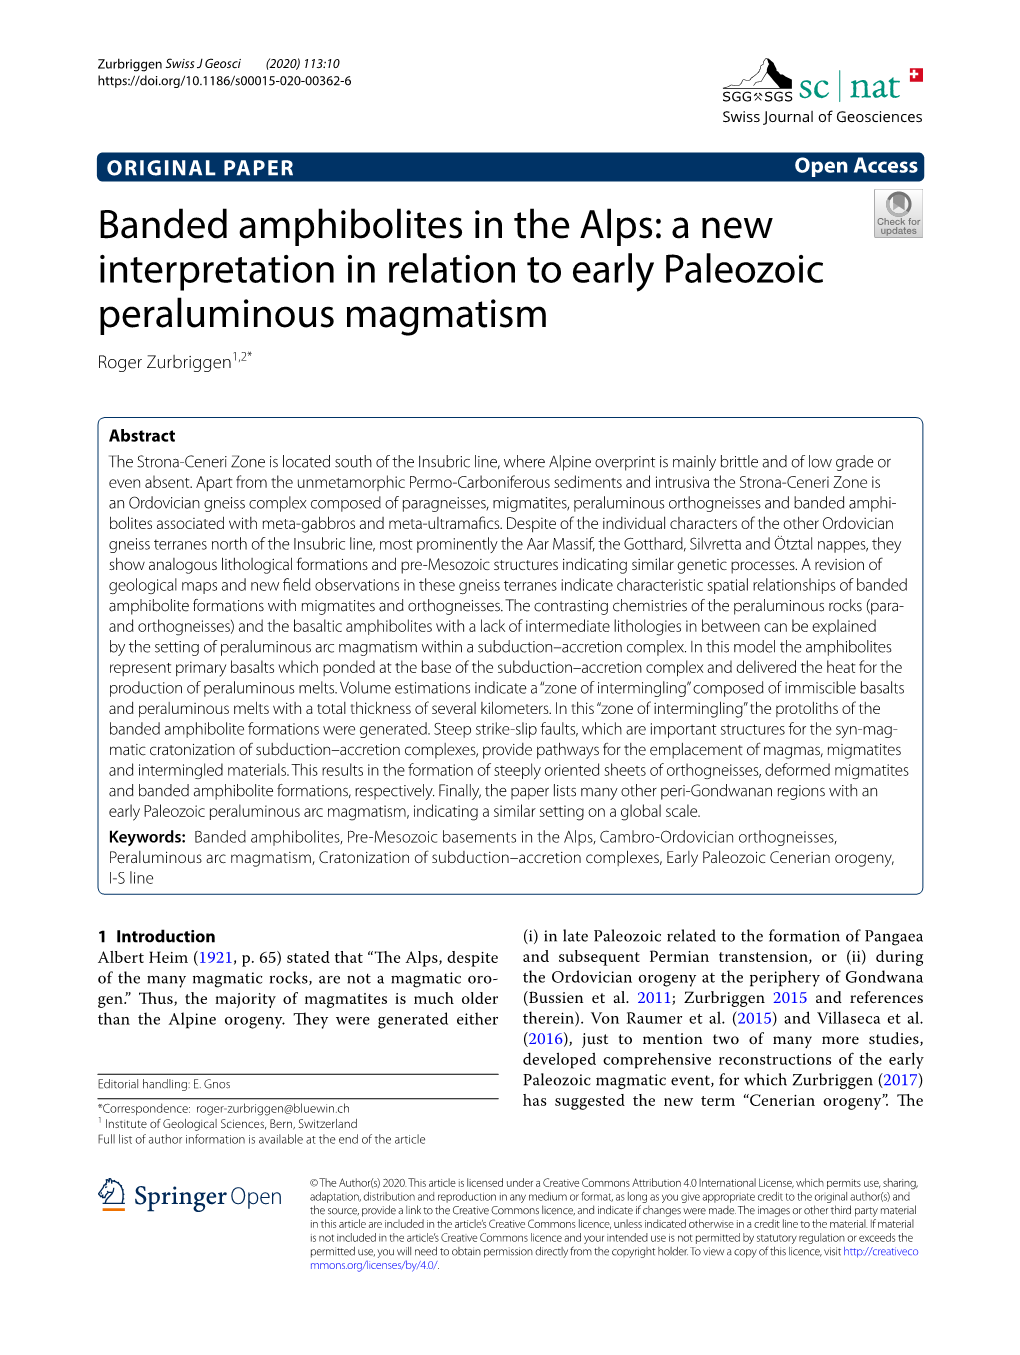 Banded Amphibolites in the Alps: a New Interpretation in Relation to Early Paleozoic Peraluminous Magmatism Roger Zurbriggen1,2*